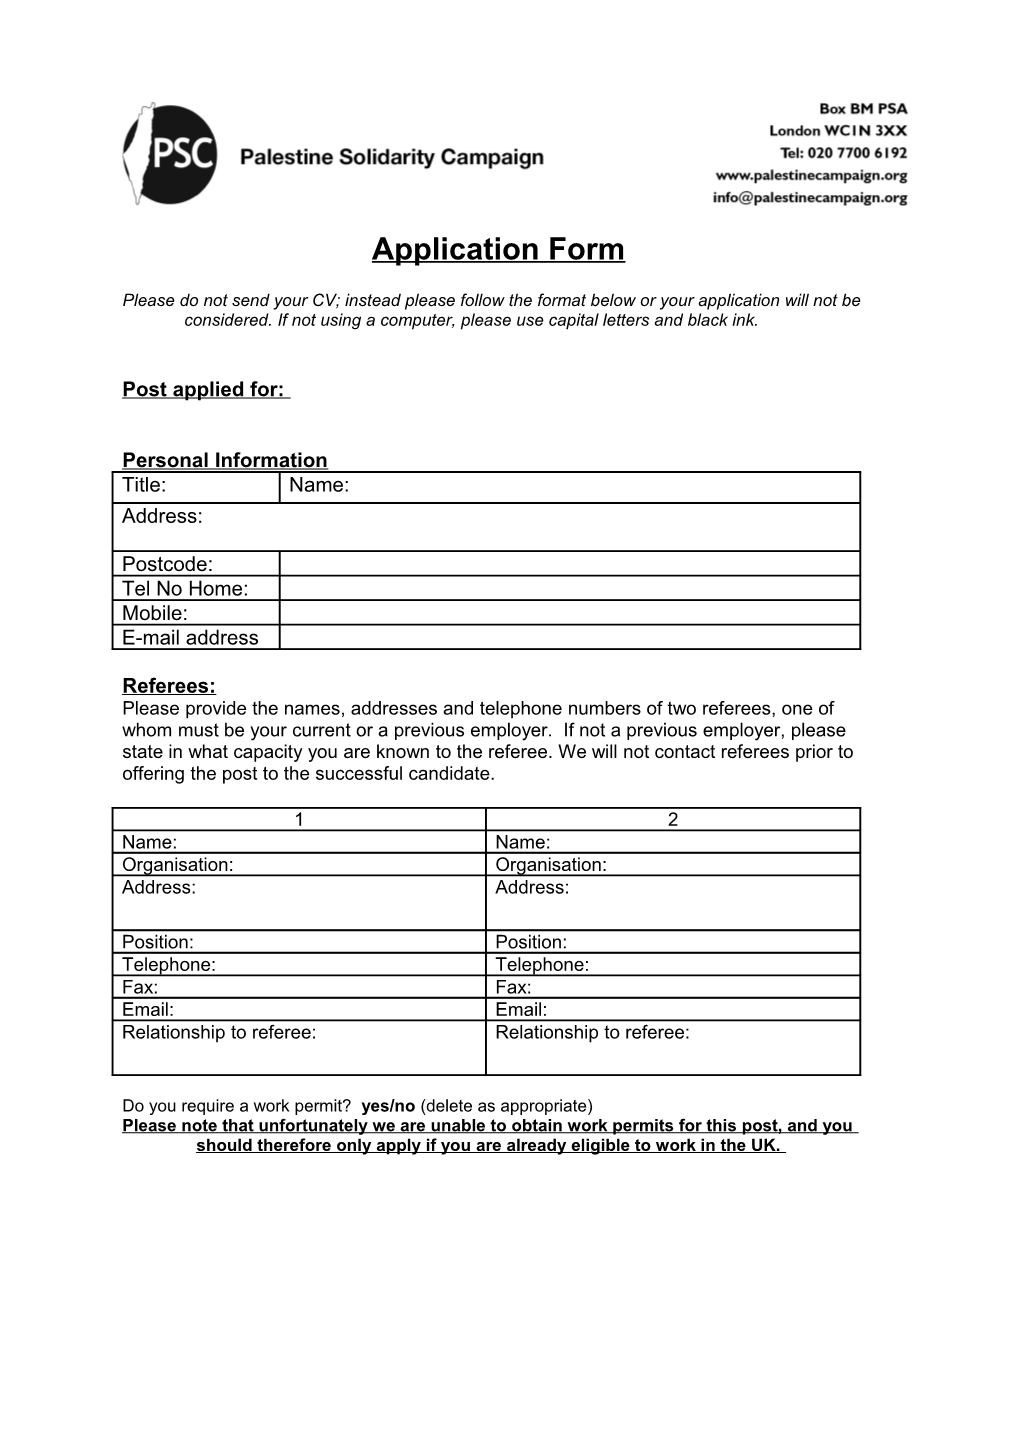 Application Form s11